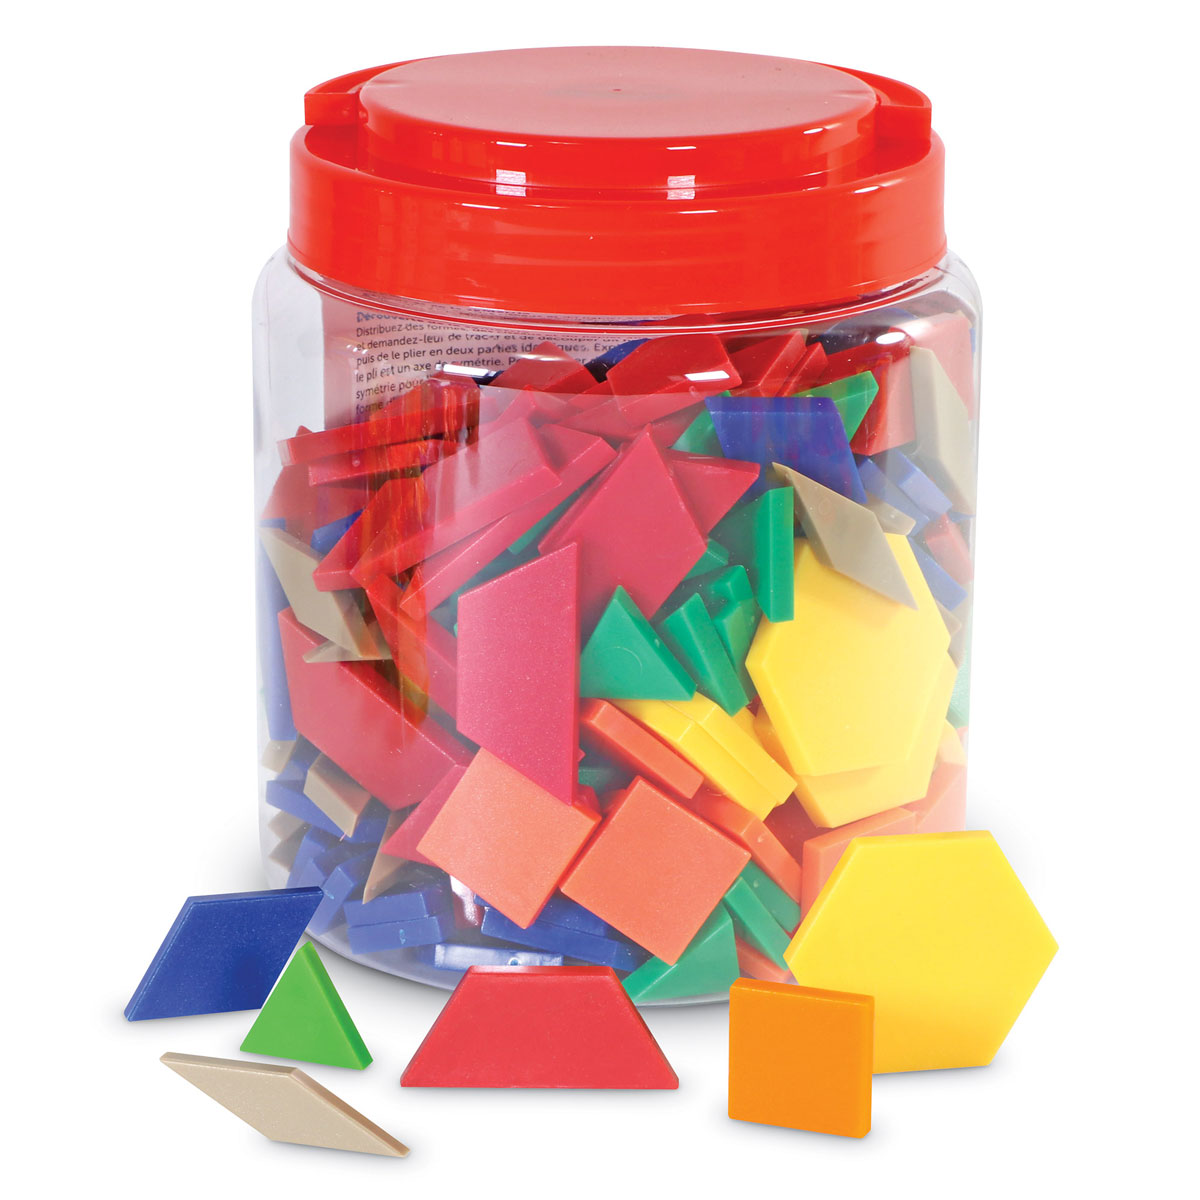 Giant Geosolids 1 Set Of 10 LEARNING RESOURCES